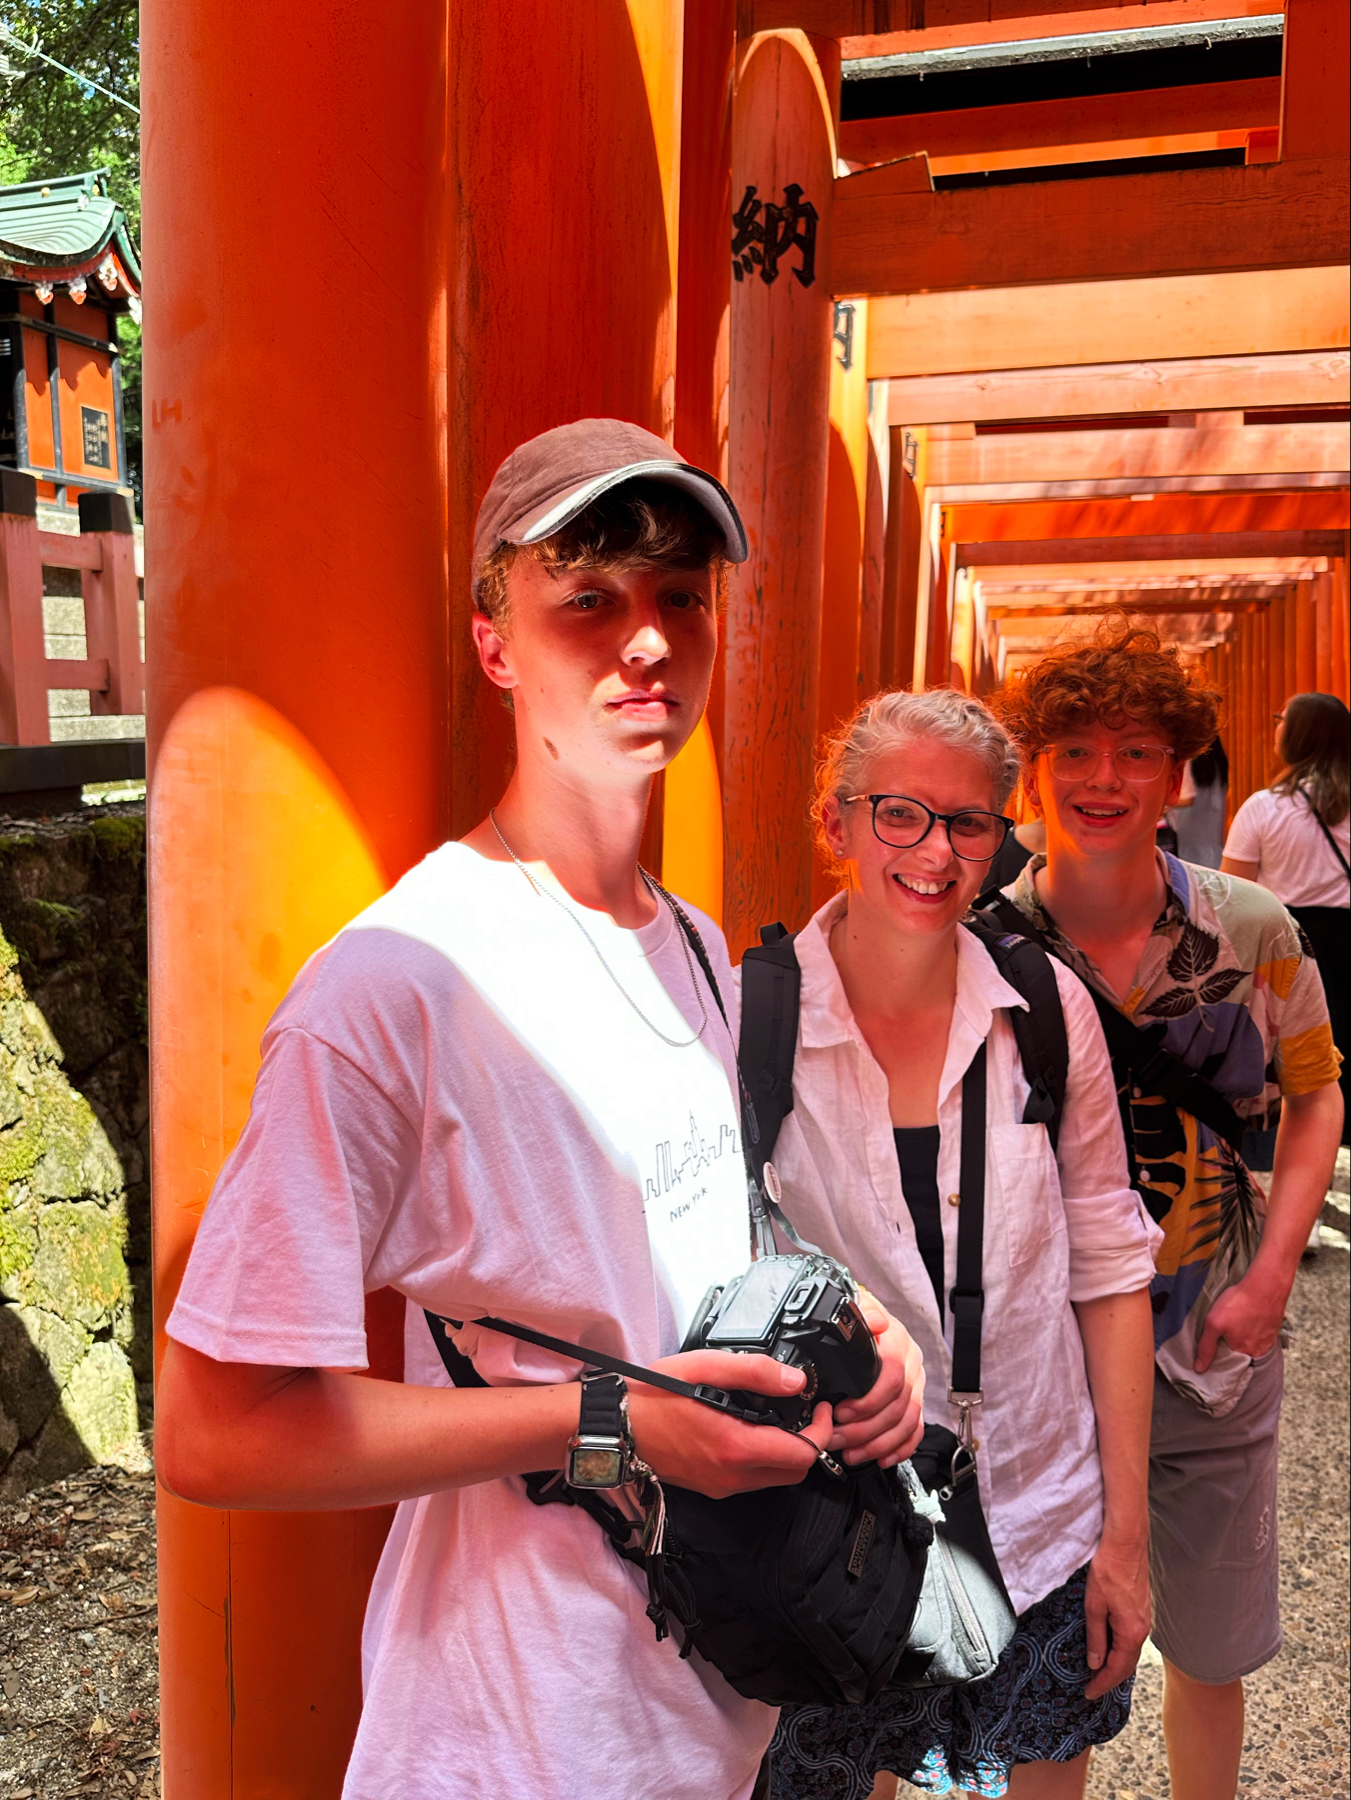 My wife and two children stand among the vibrant orange torii gates at Fushimi Inari Shrine in Kyoto, Japan. The individual in the foreground is holding a camera, wearing a white T-shirt and cap, while the other two are smiling in the background,